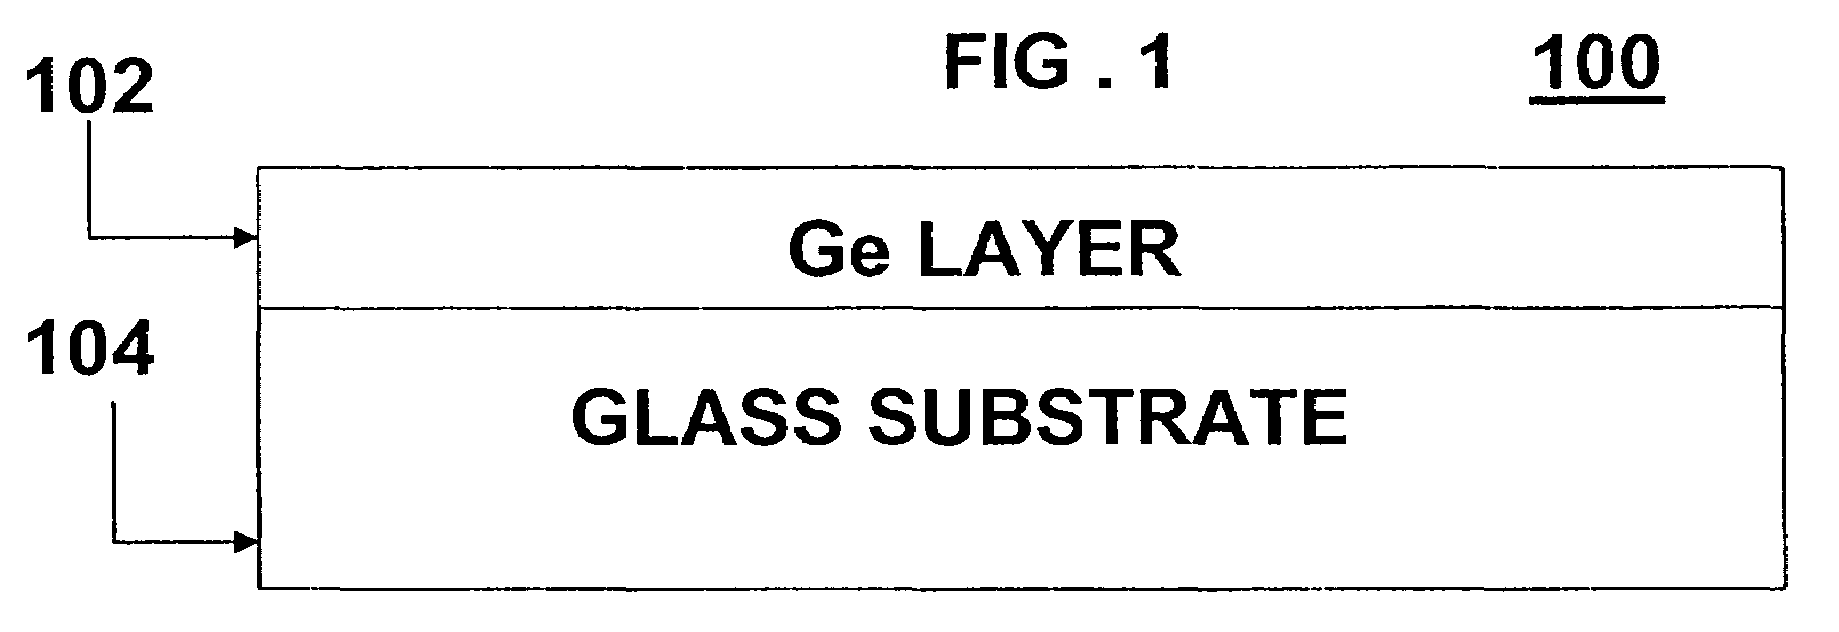 Germanium on glass and glass-ceramic structures